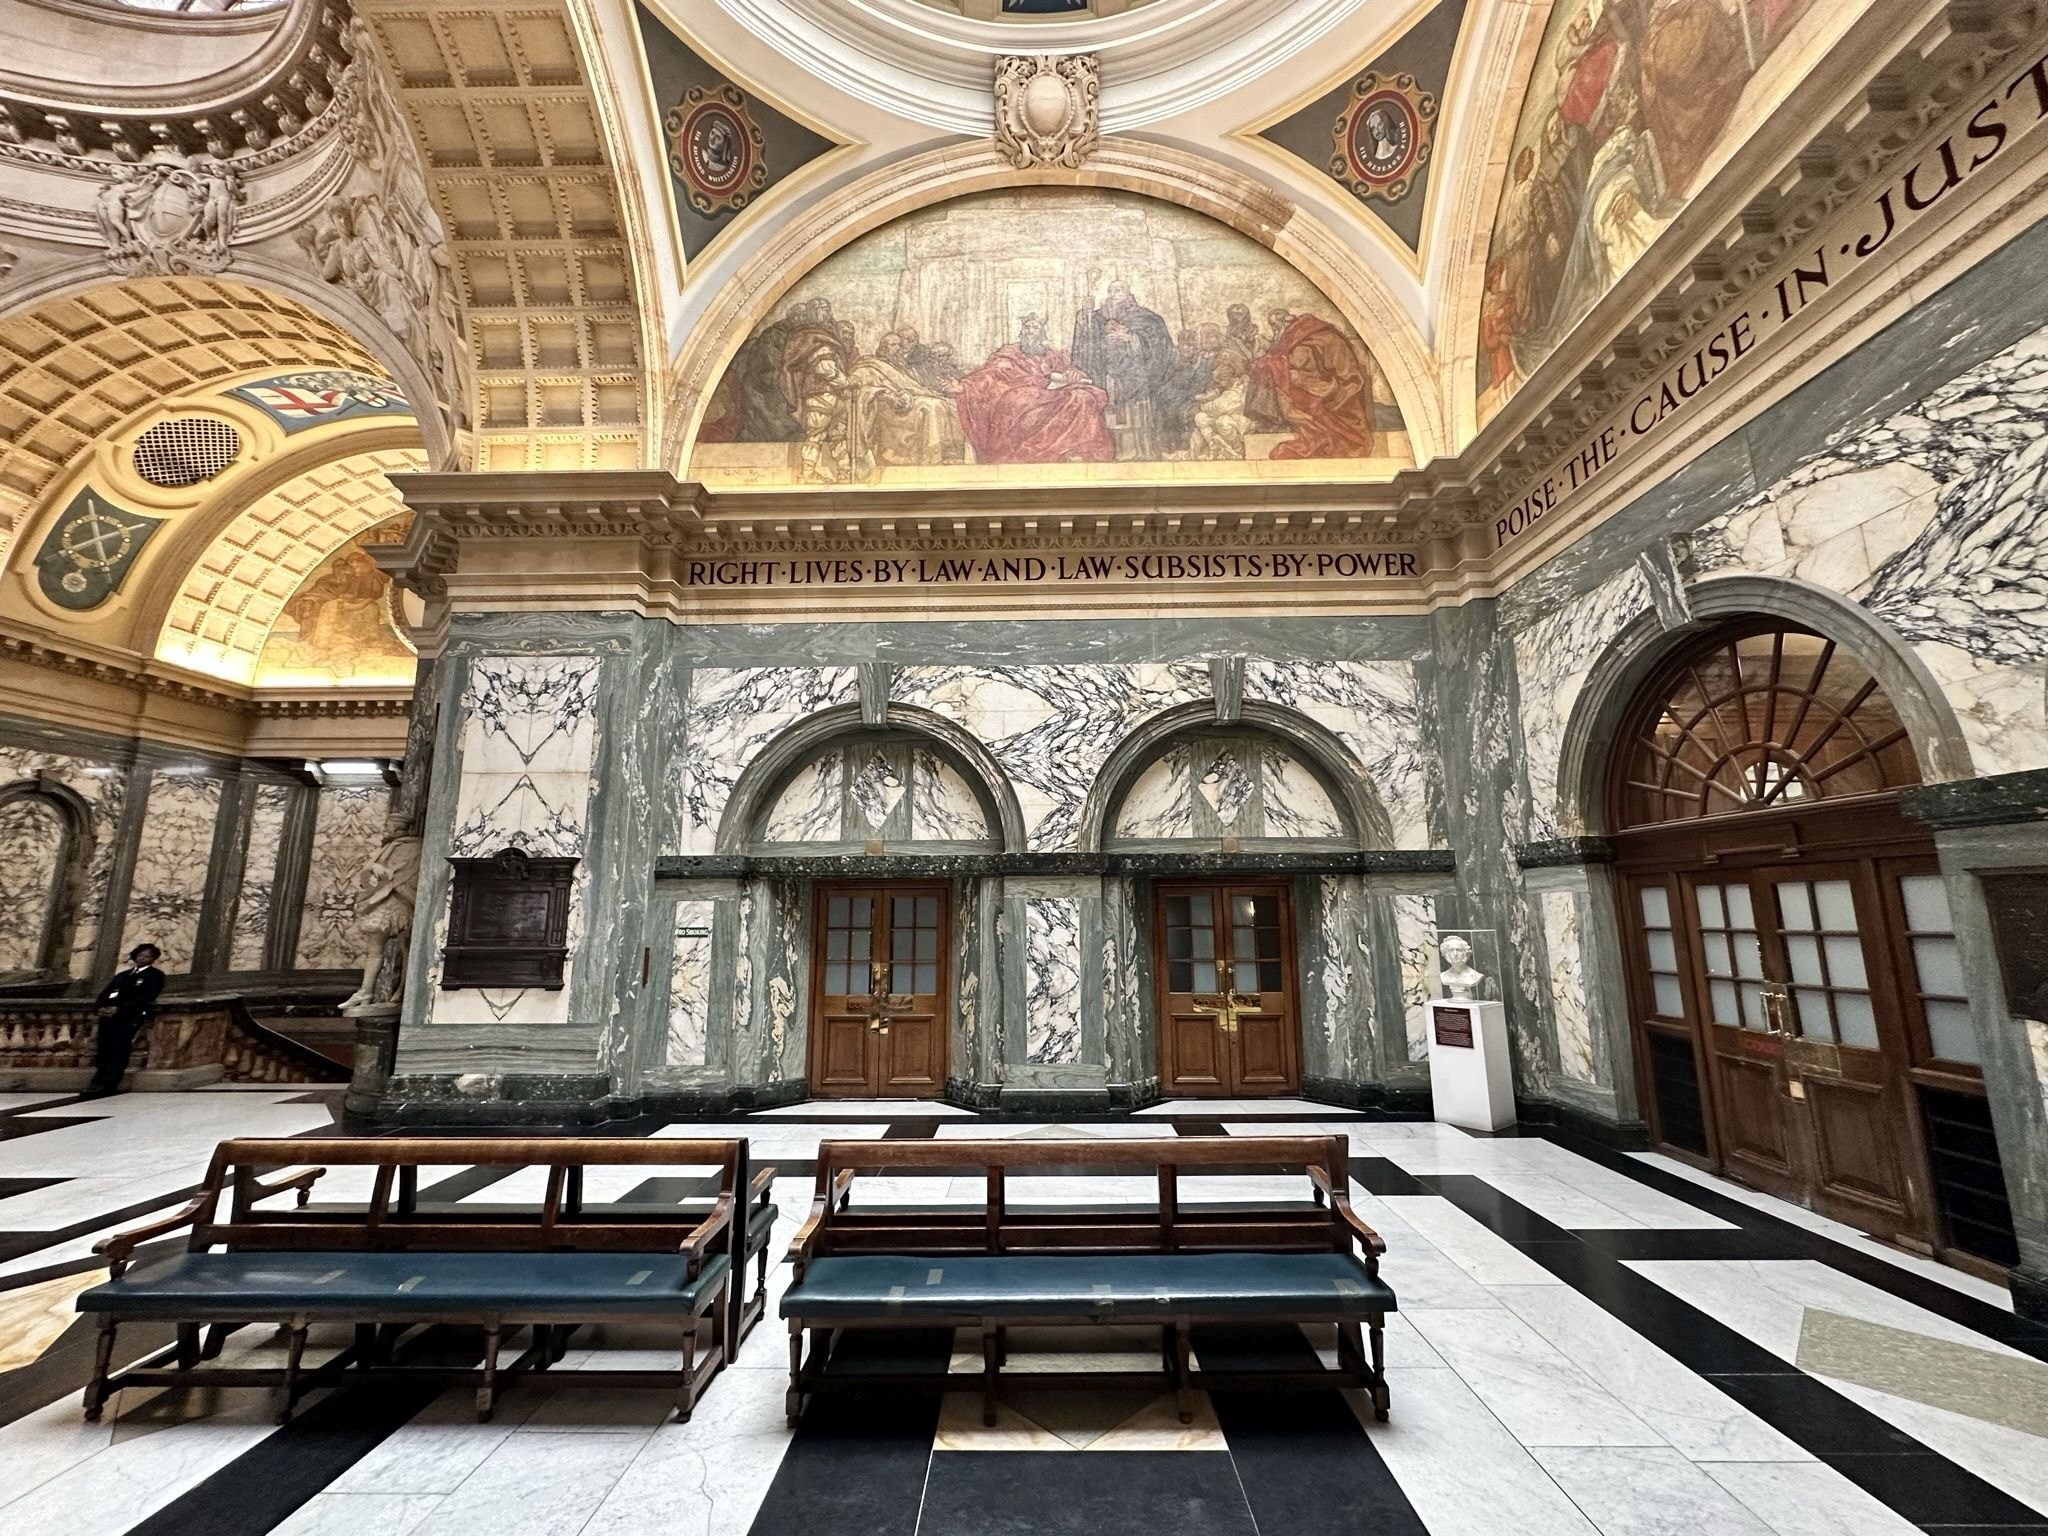 Interior of The Old Bailey, Central Criminal Court. Located in the City of London on the site of Newgate prison.